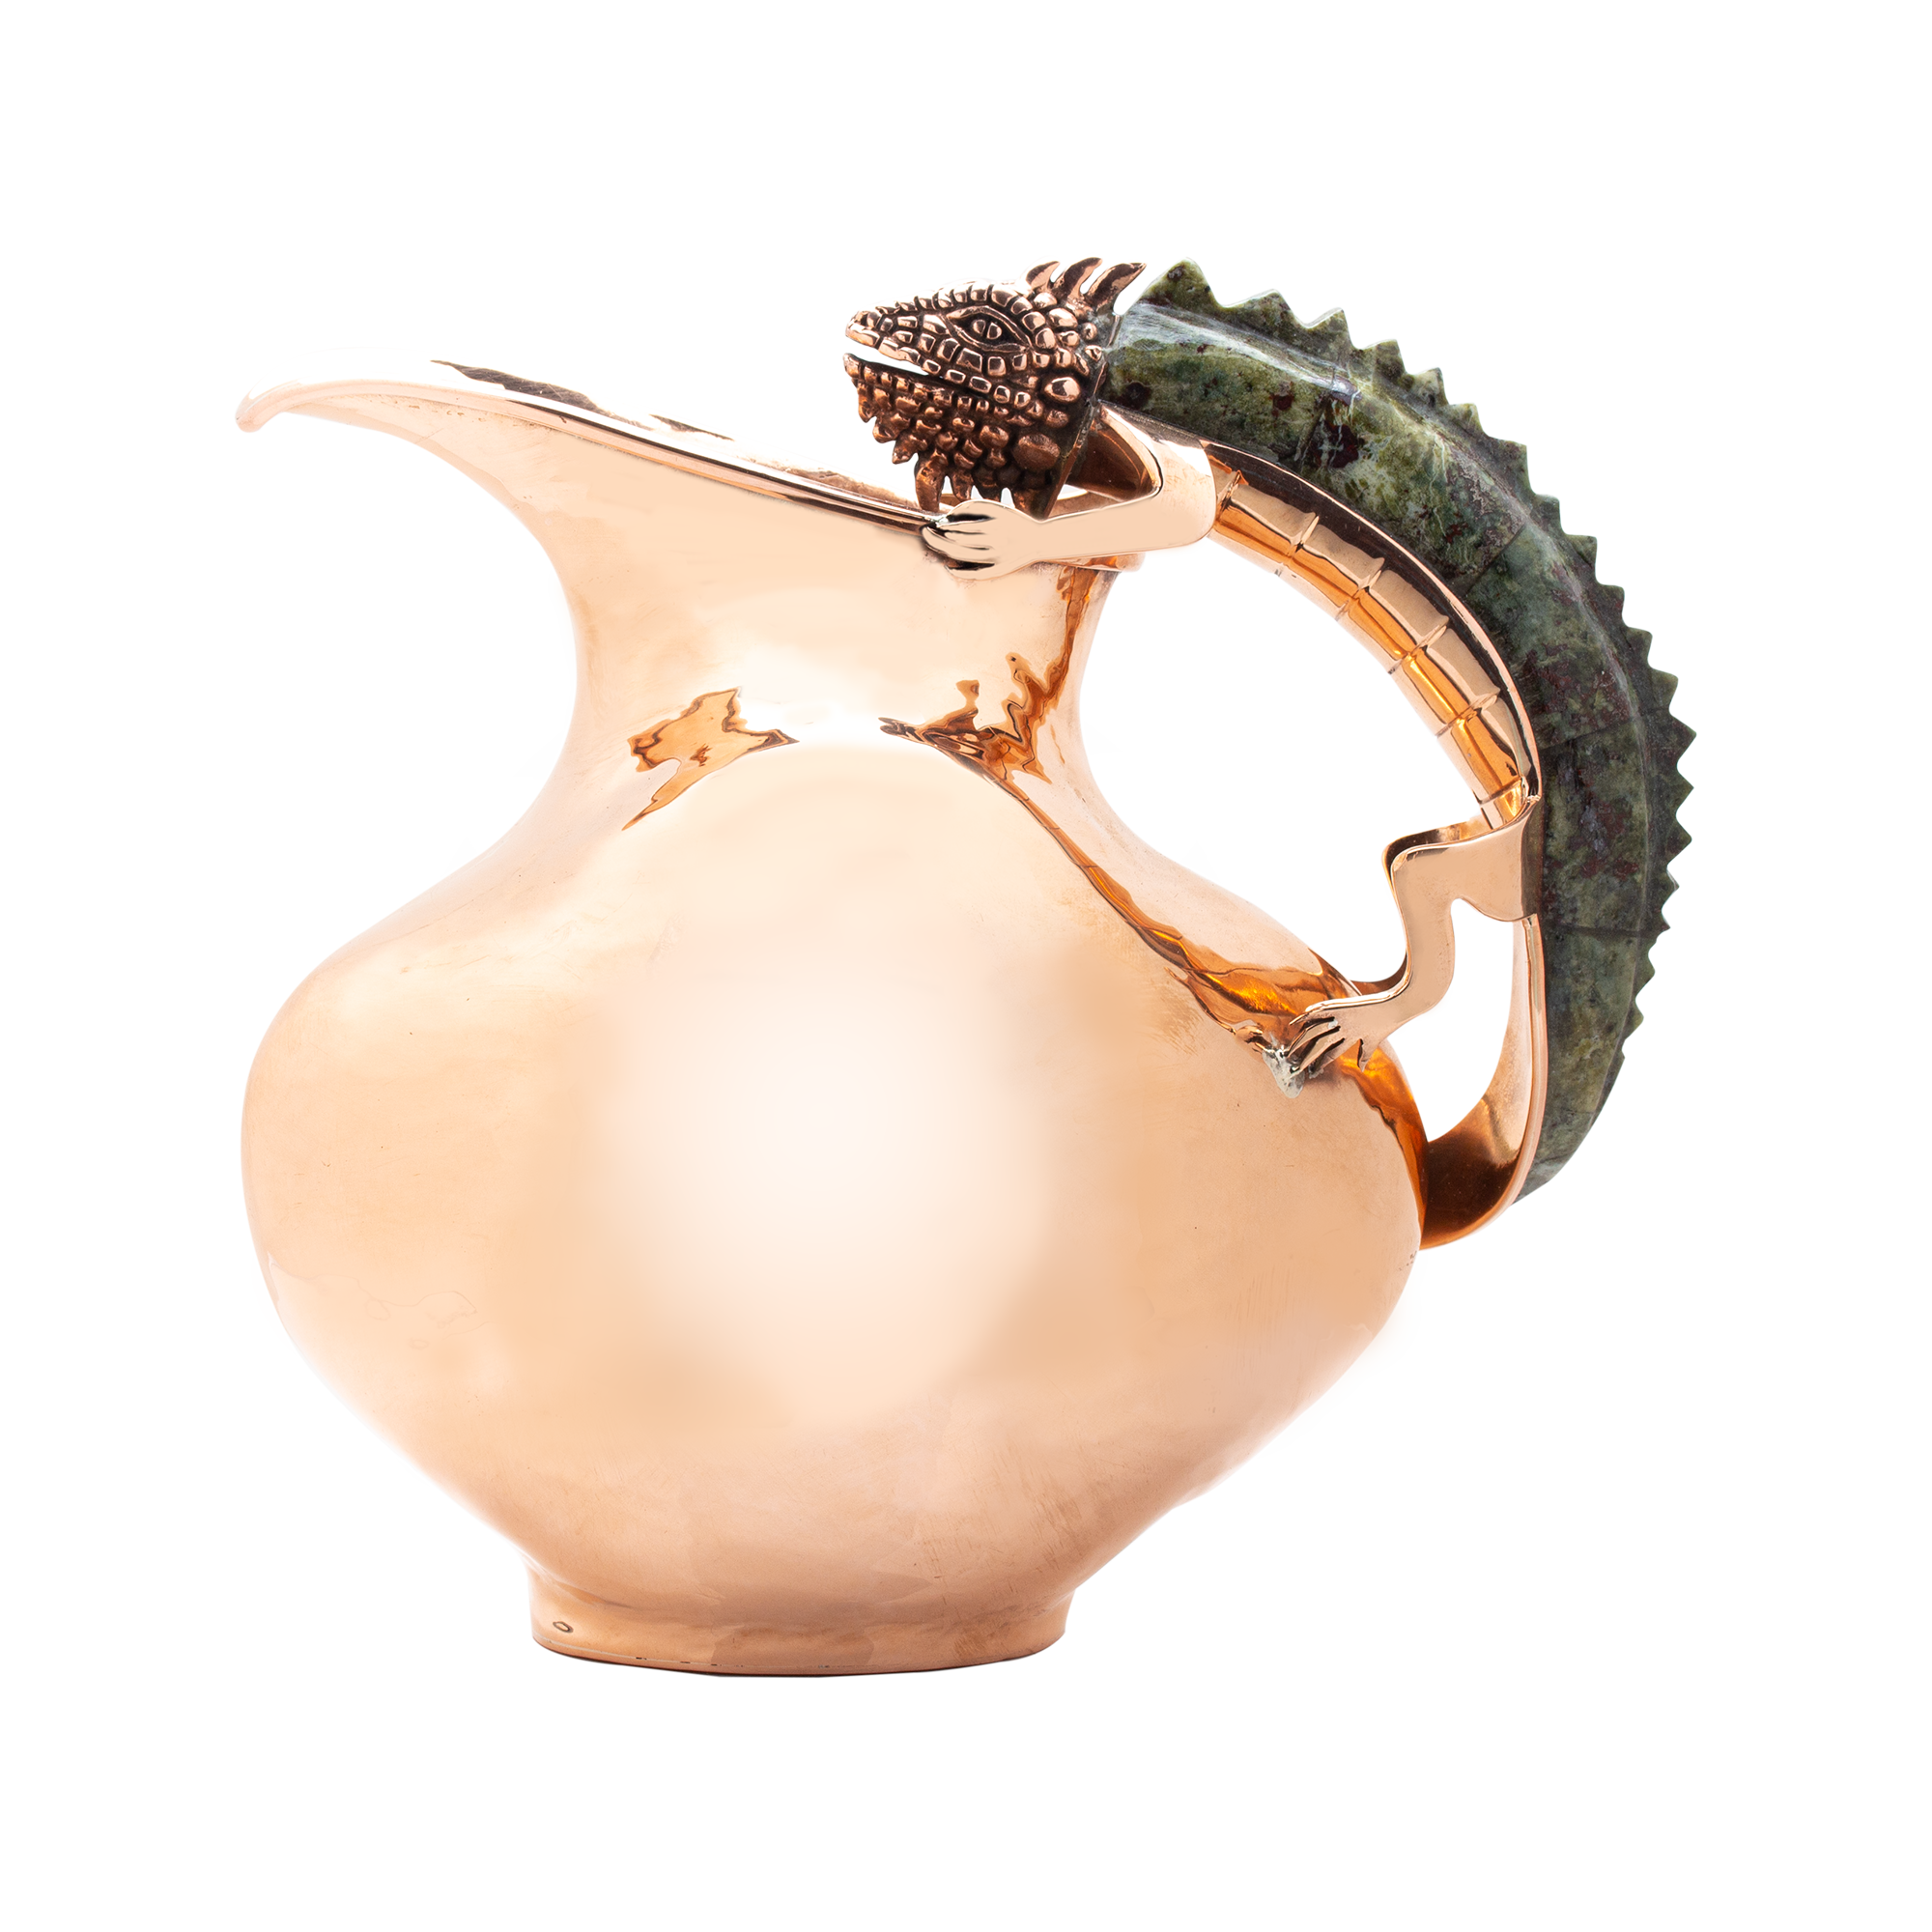 SU.ANG.4040 - Copper Wide Mouth Pitcher, HPSilver, LLC